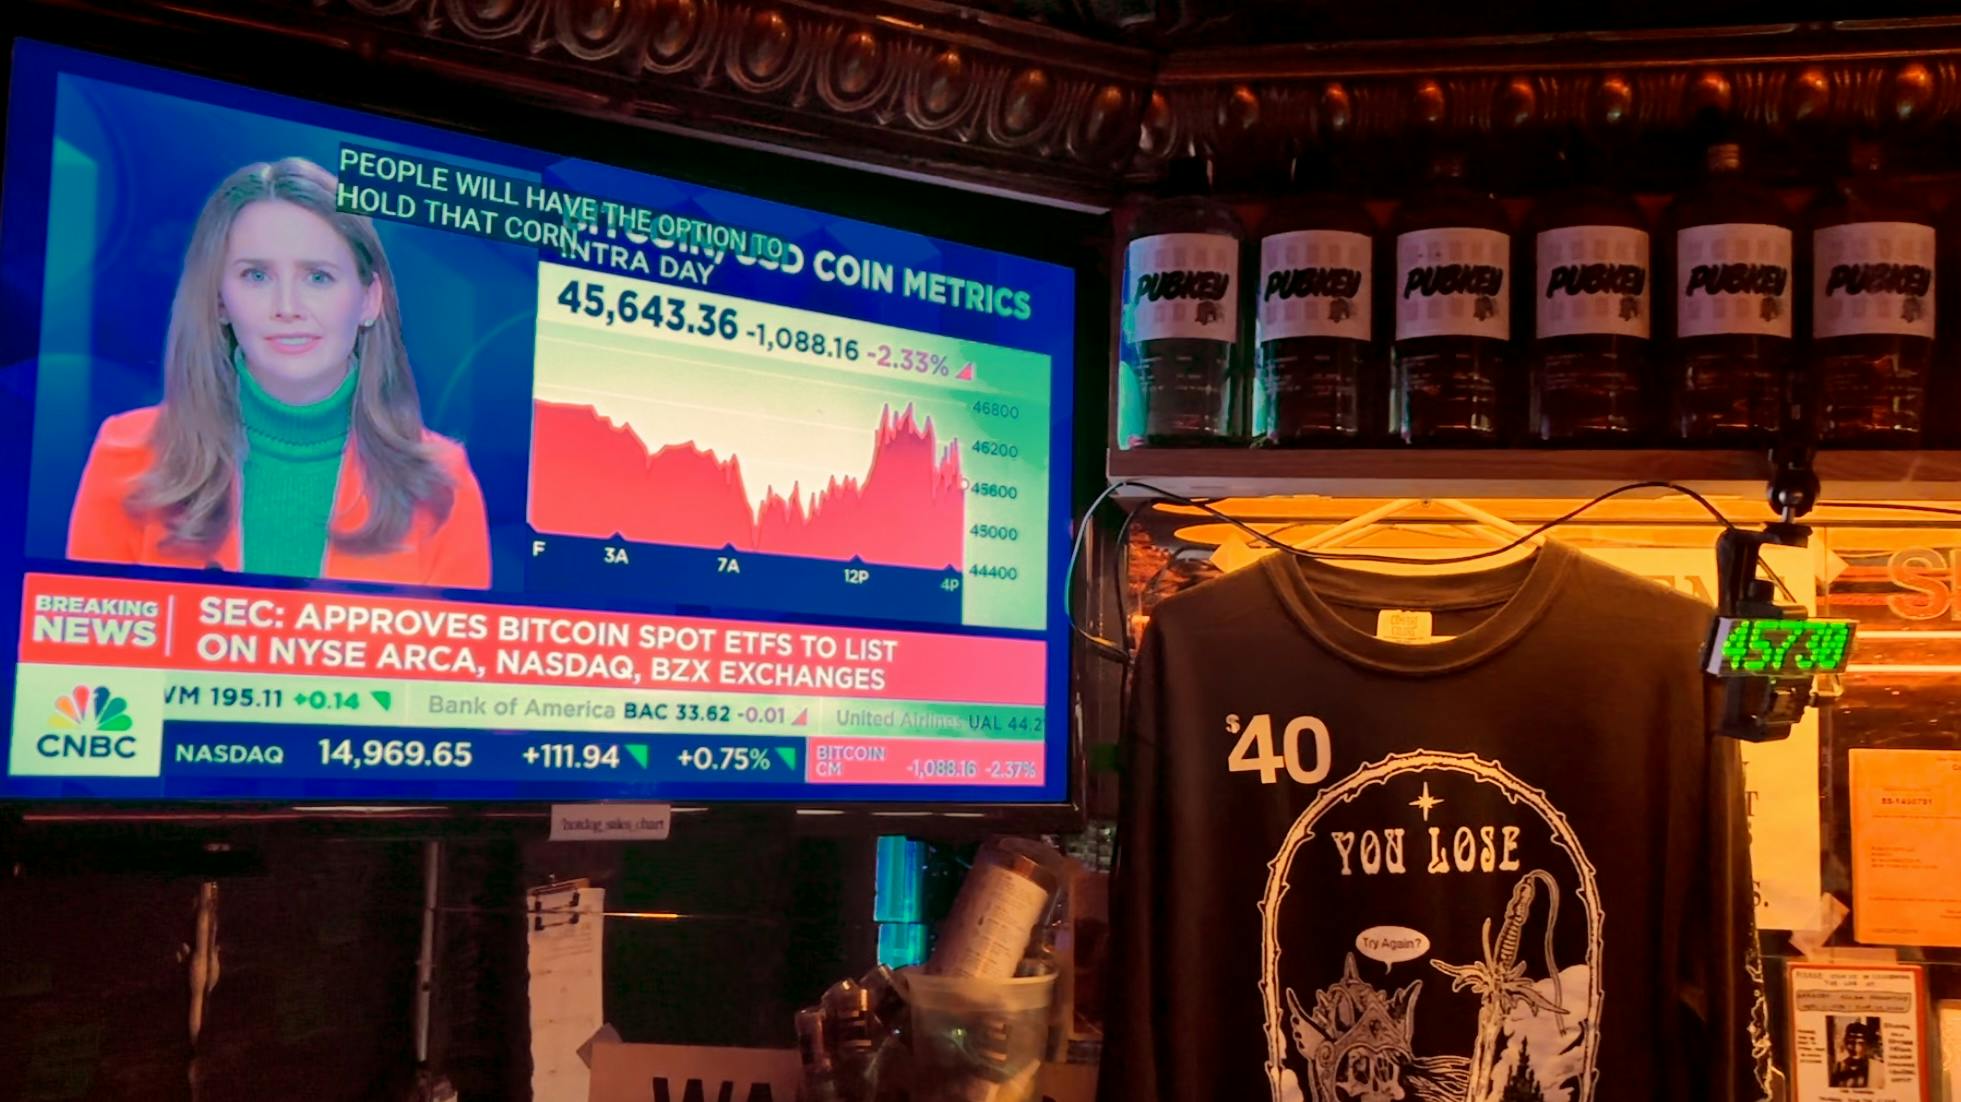 Bitcoin barely budges on ETF approval day, but enthusiasts celebrate its Wall Street debut anyway. Image: André Beganski / Coinage